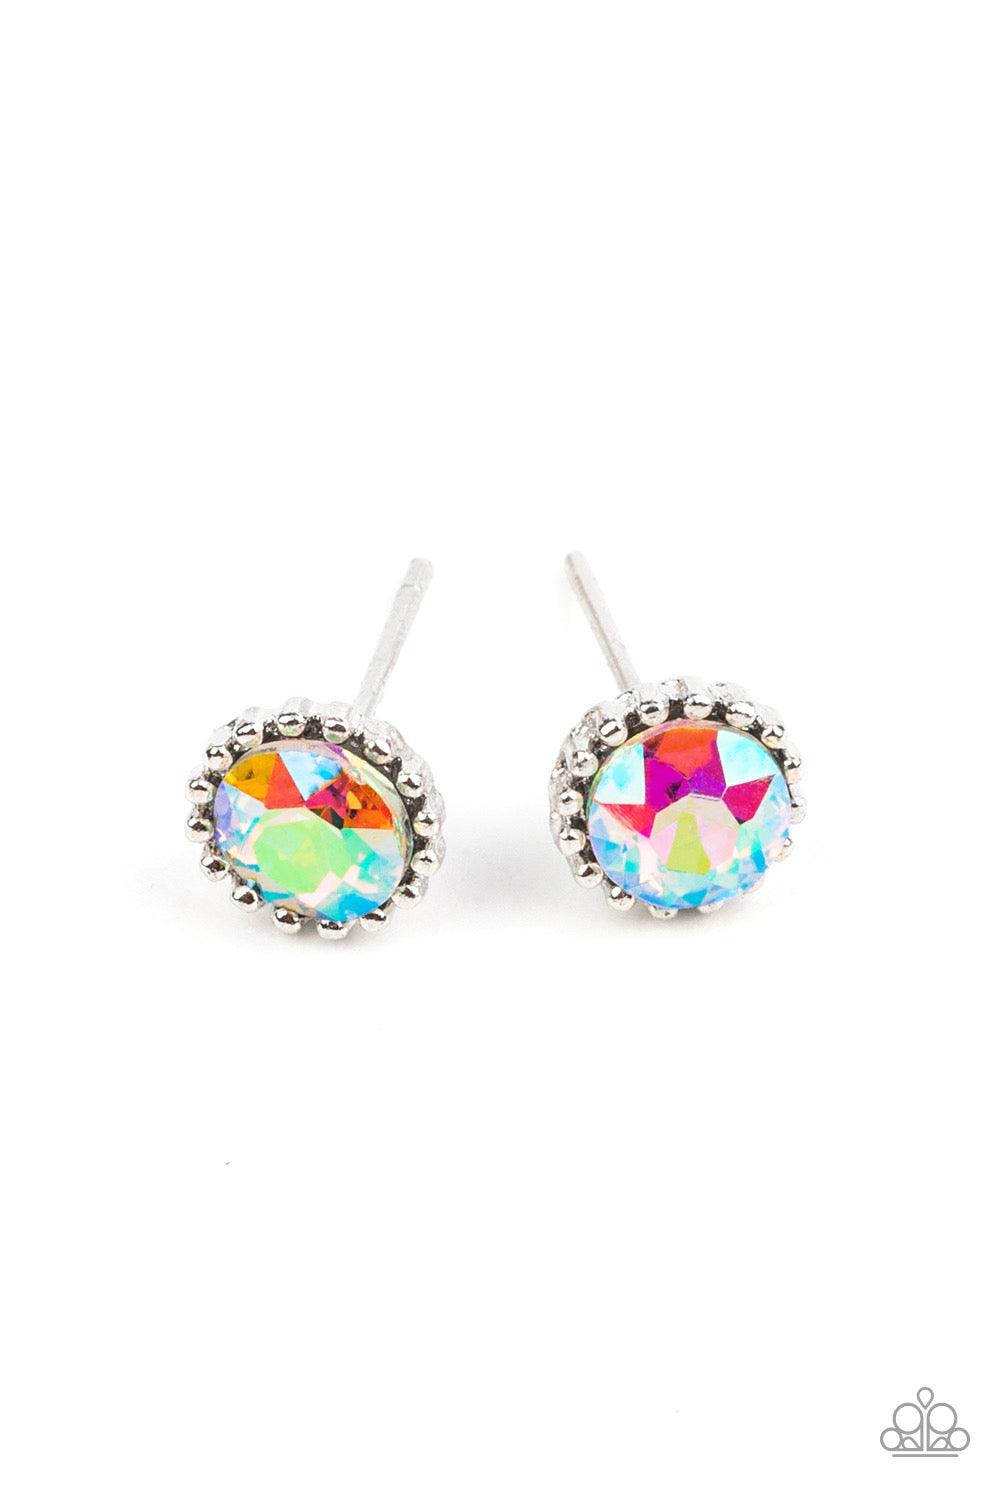 Paparazzi Accessories Starlet Shimmer Earrings: #22 ~Multi C Jewelry